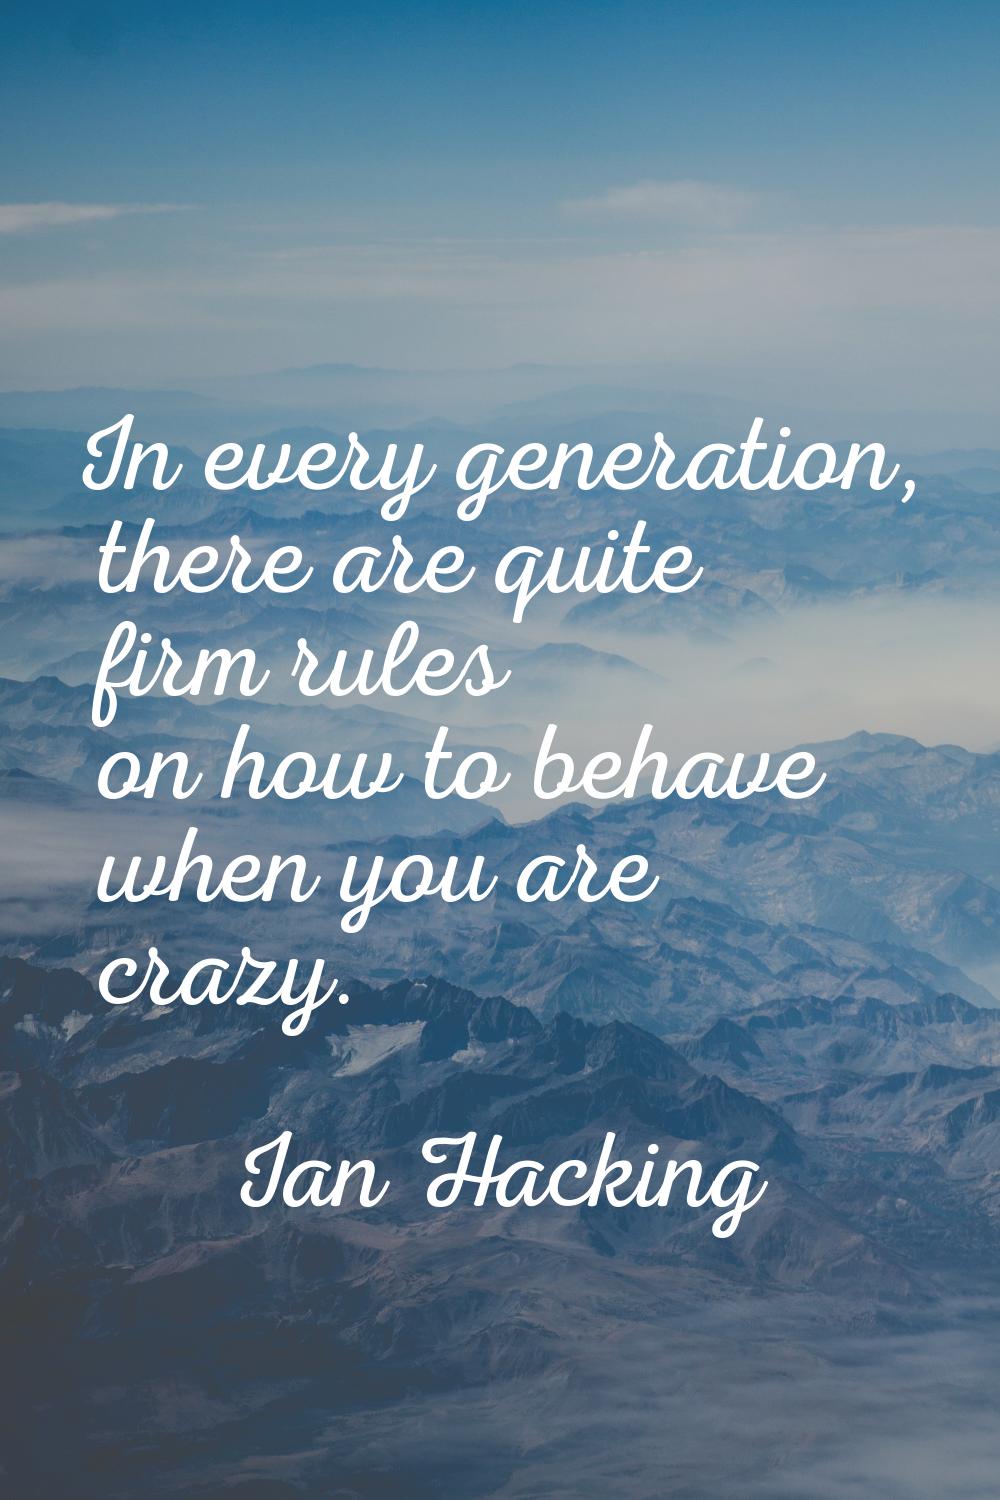 In every generation, there are quite firm rules on how to behave when you are crazy.